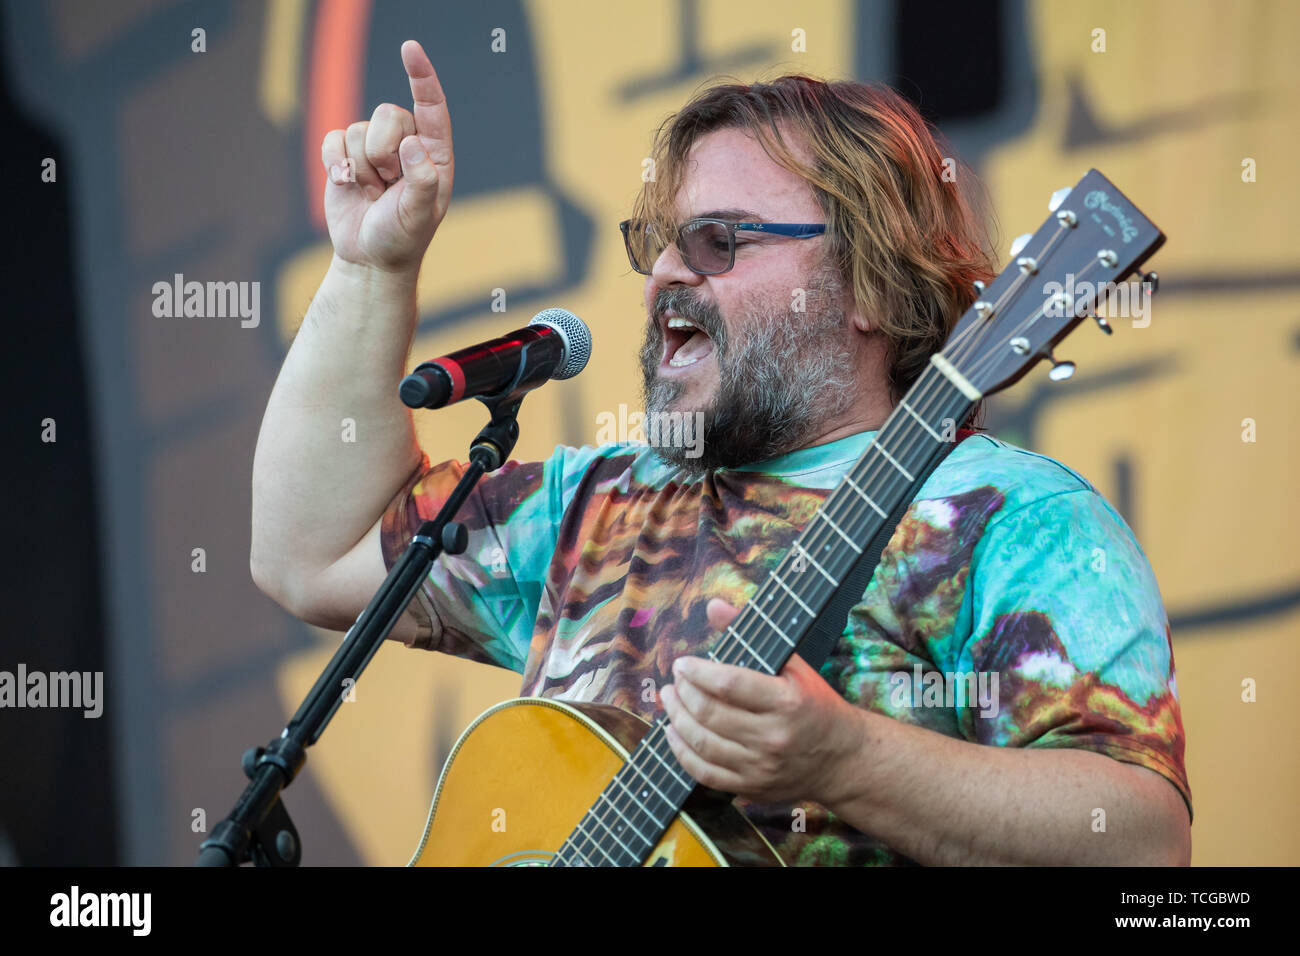 Nuremberg, Germany. 08th June, 2019. The US-American singer and actor Jack Black from the band Tenacious D. is on stage at the open-air festival 'Rock im Park'. The music festival runs until 9 June 2019. Credit: Rachel Boßmeyer/dpa/Alamy Live News Stock Photo